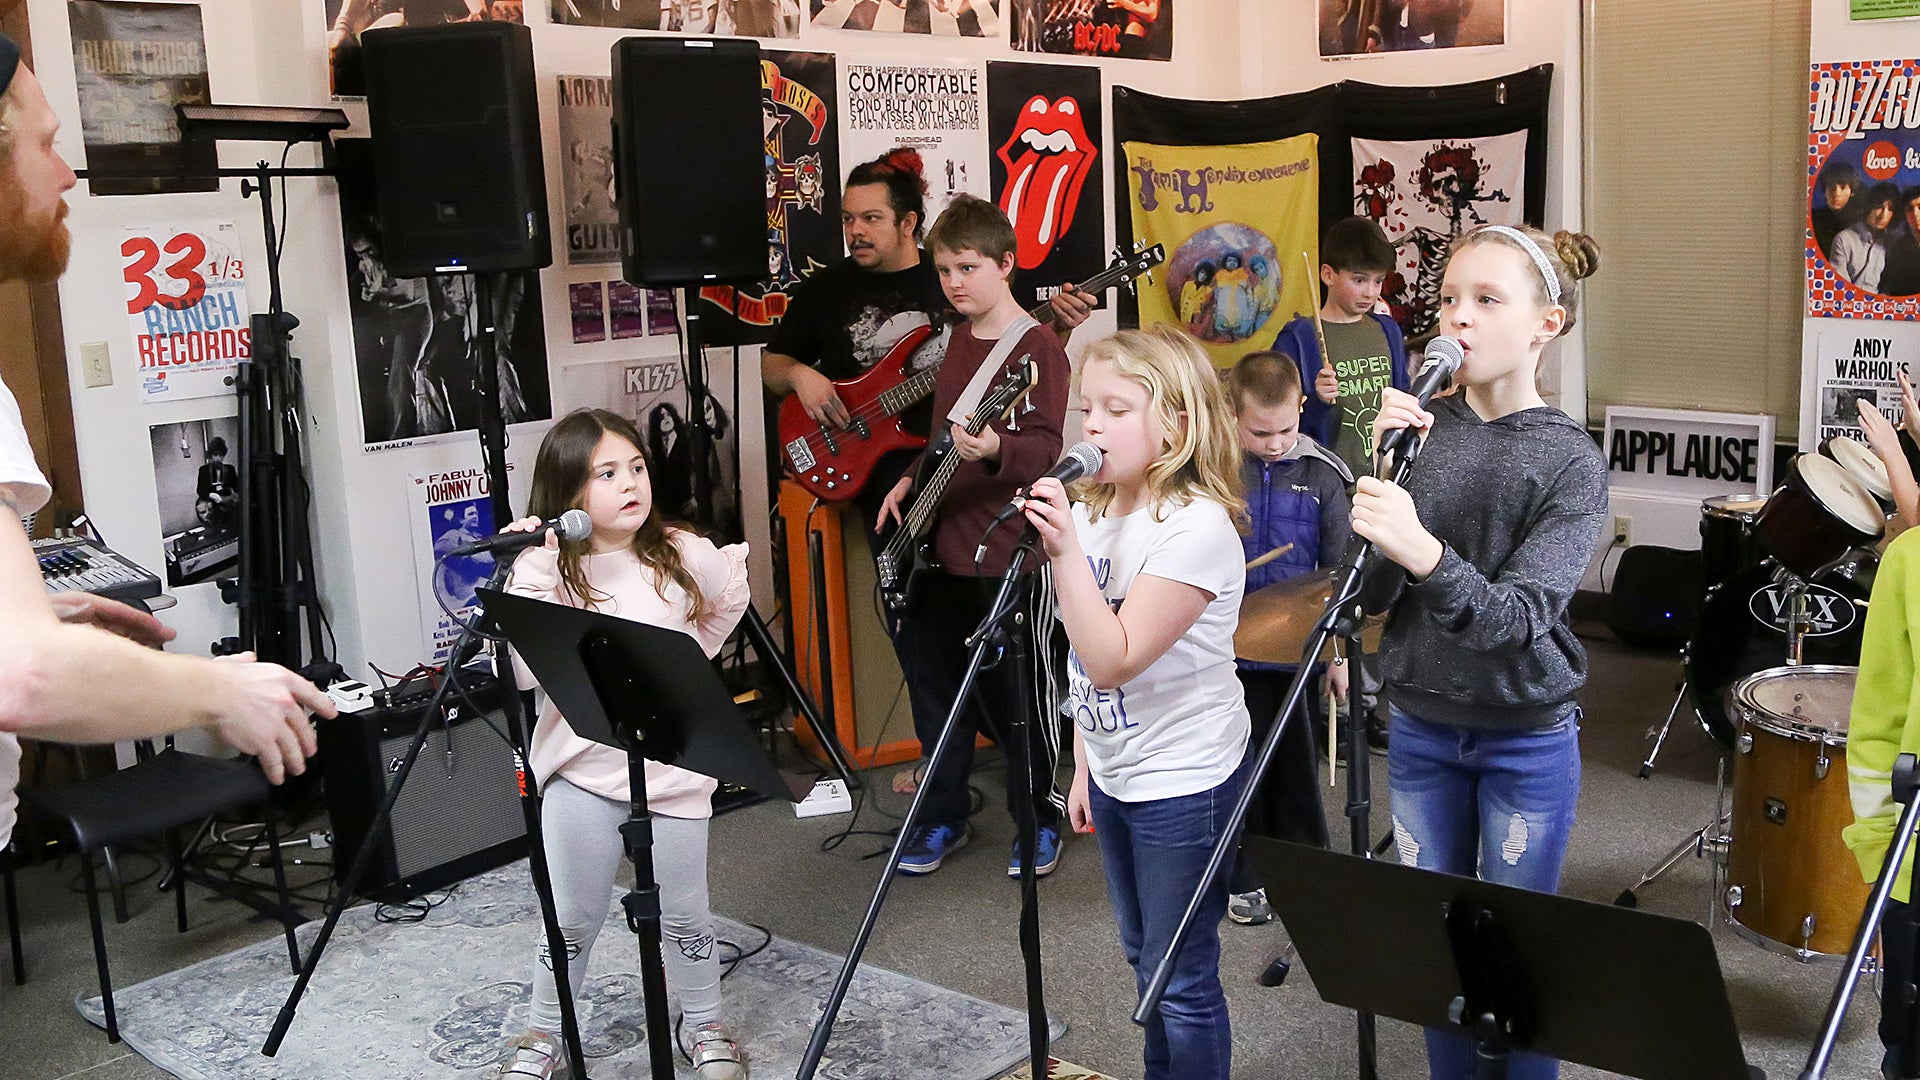 A group of young rockers age 8 -11. They are performing an indoor show.